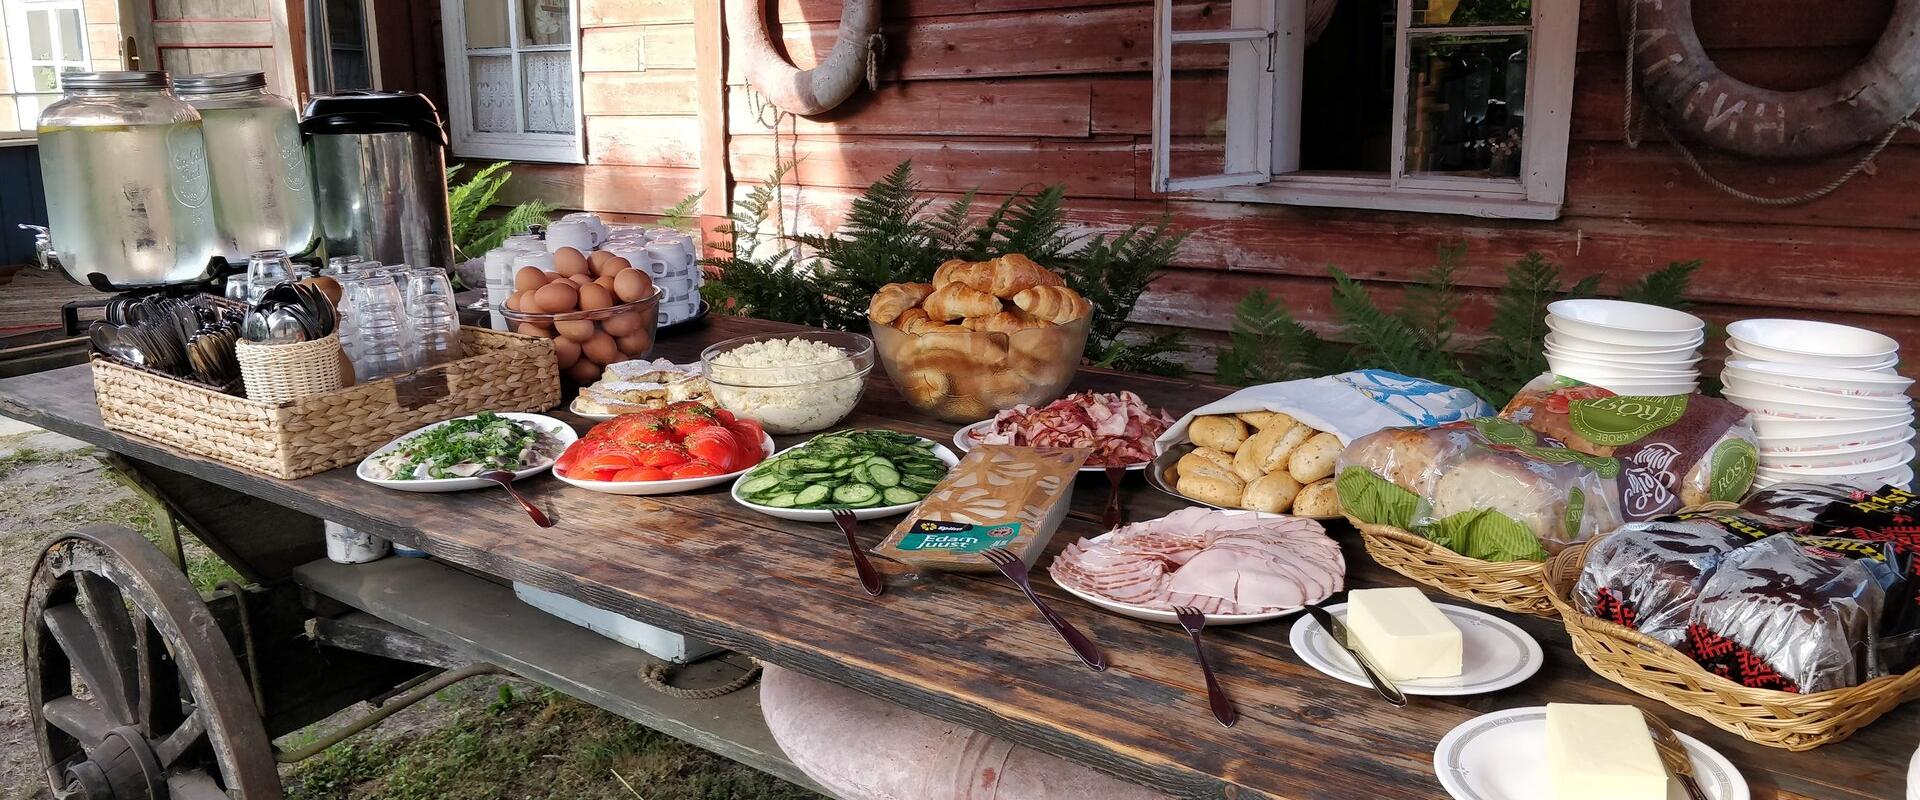 Table laid for breakfast in the Liise Farm yard